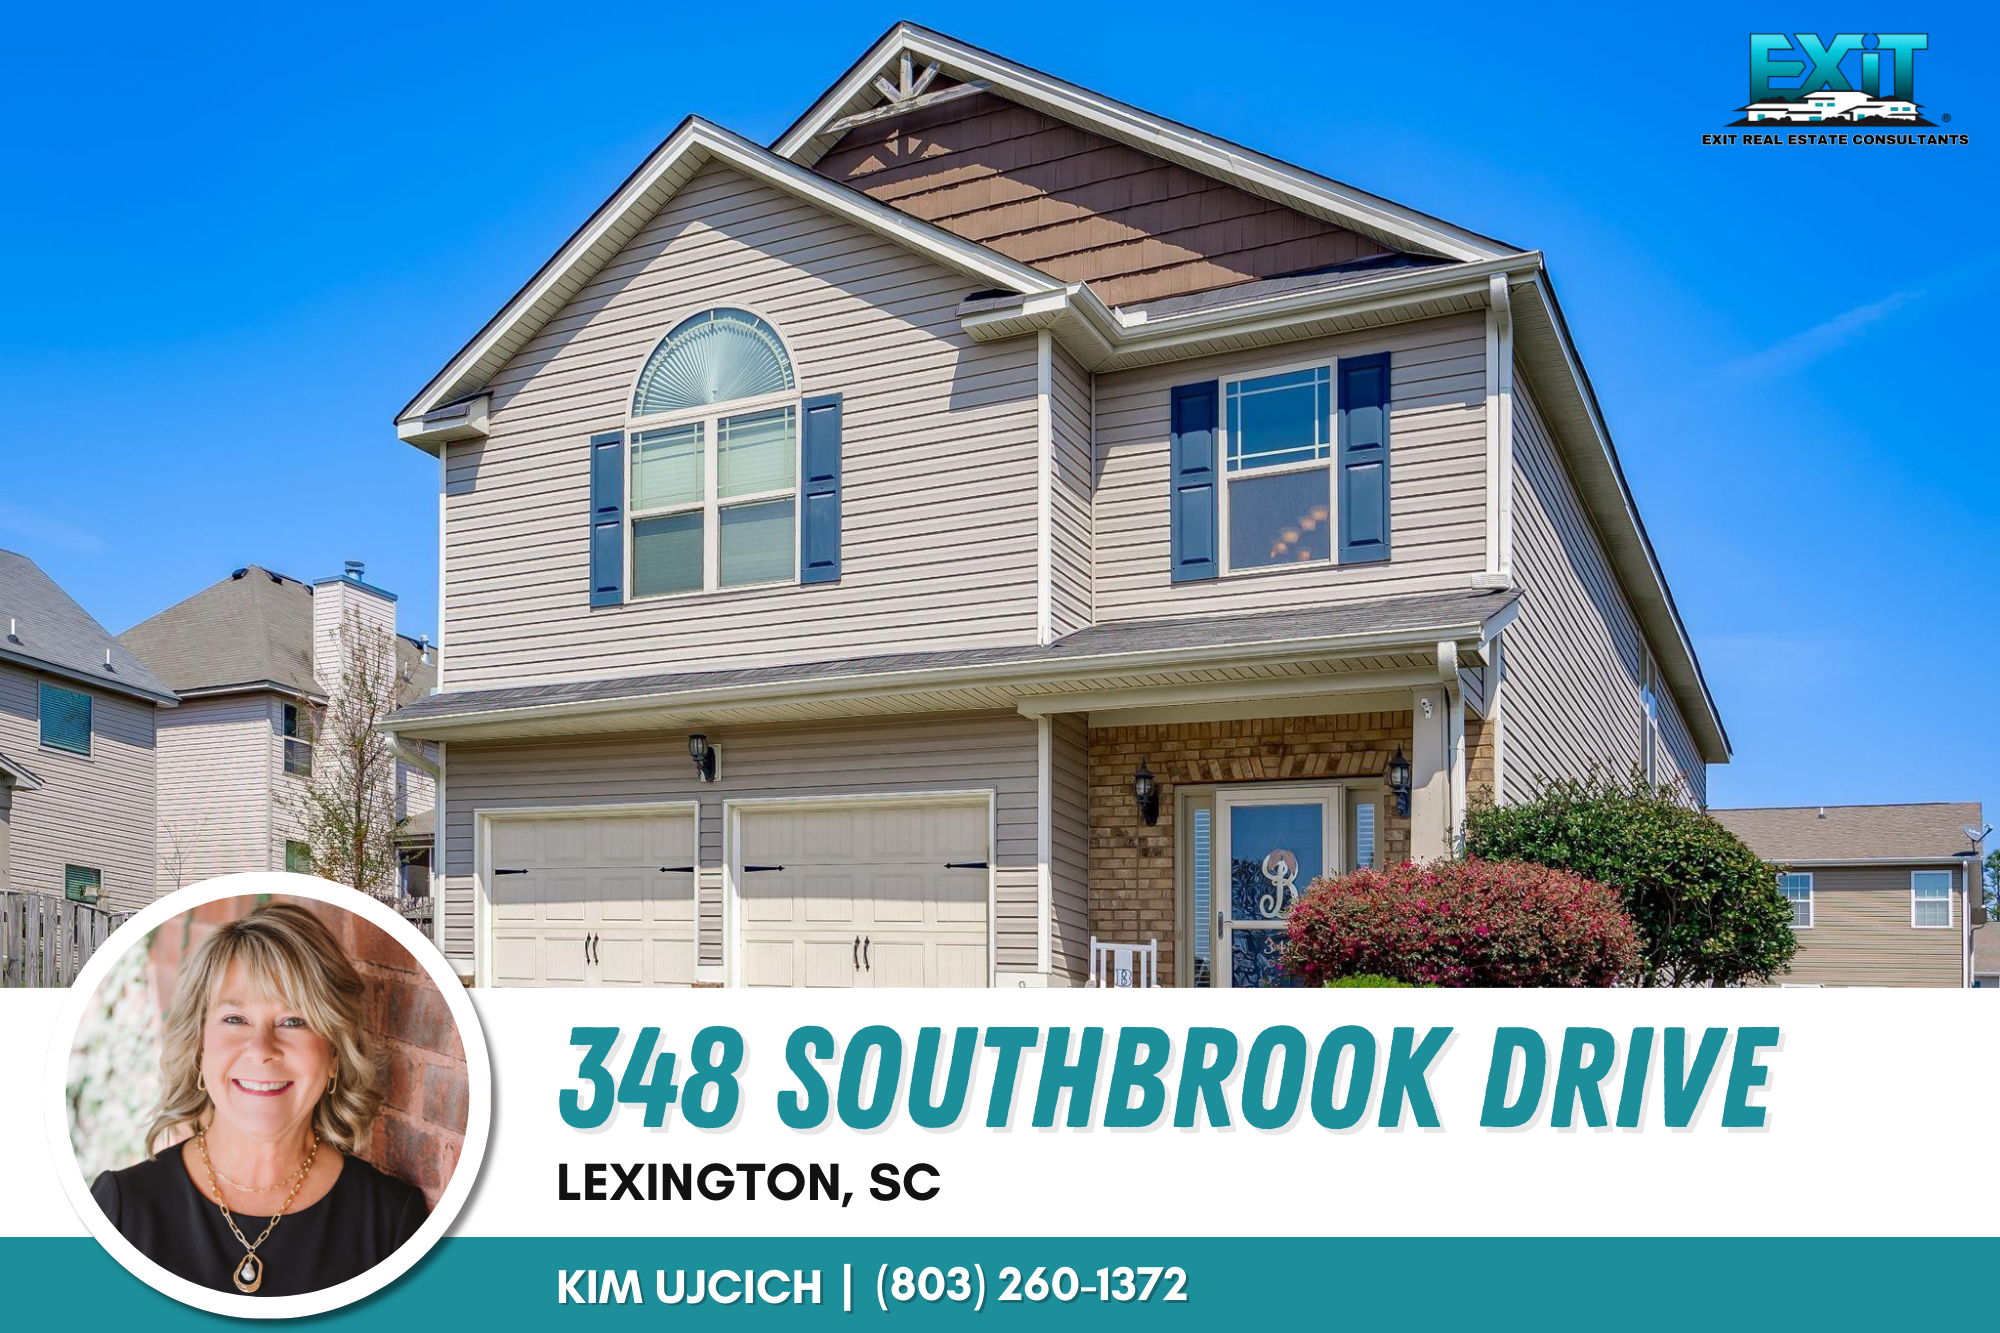 Just listed in South Brook